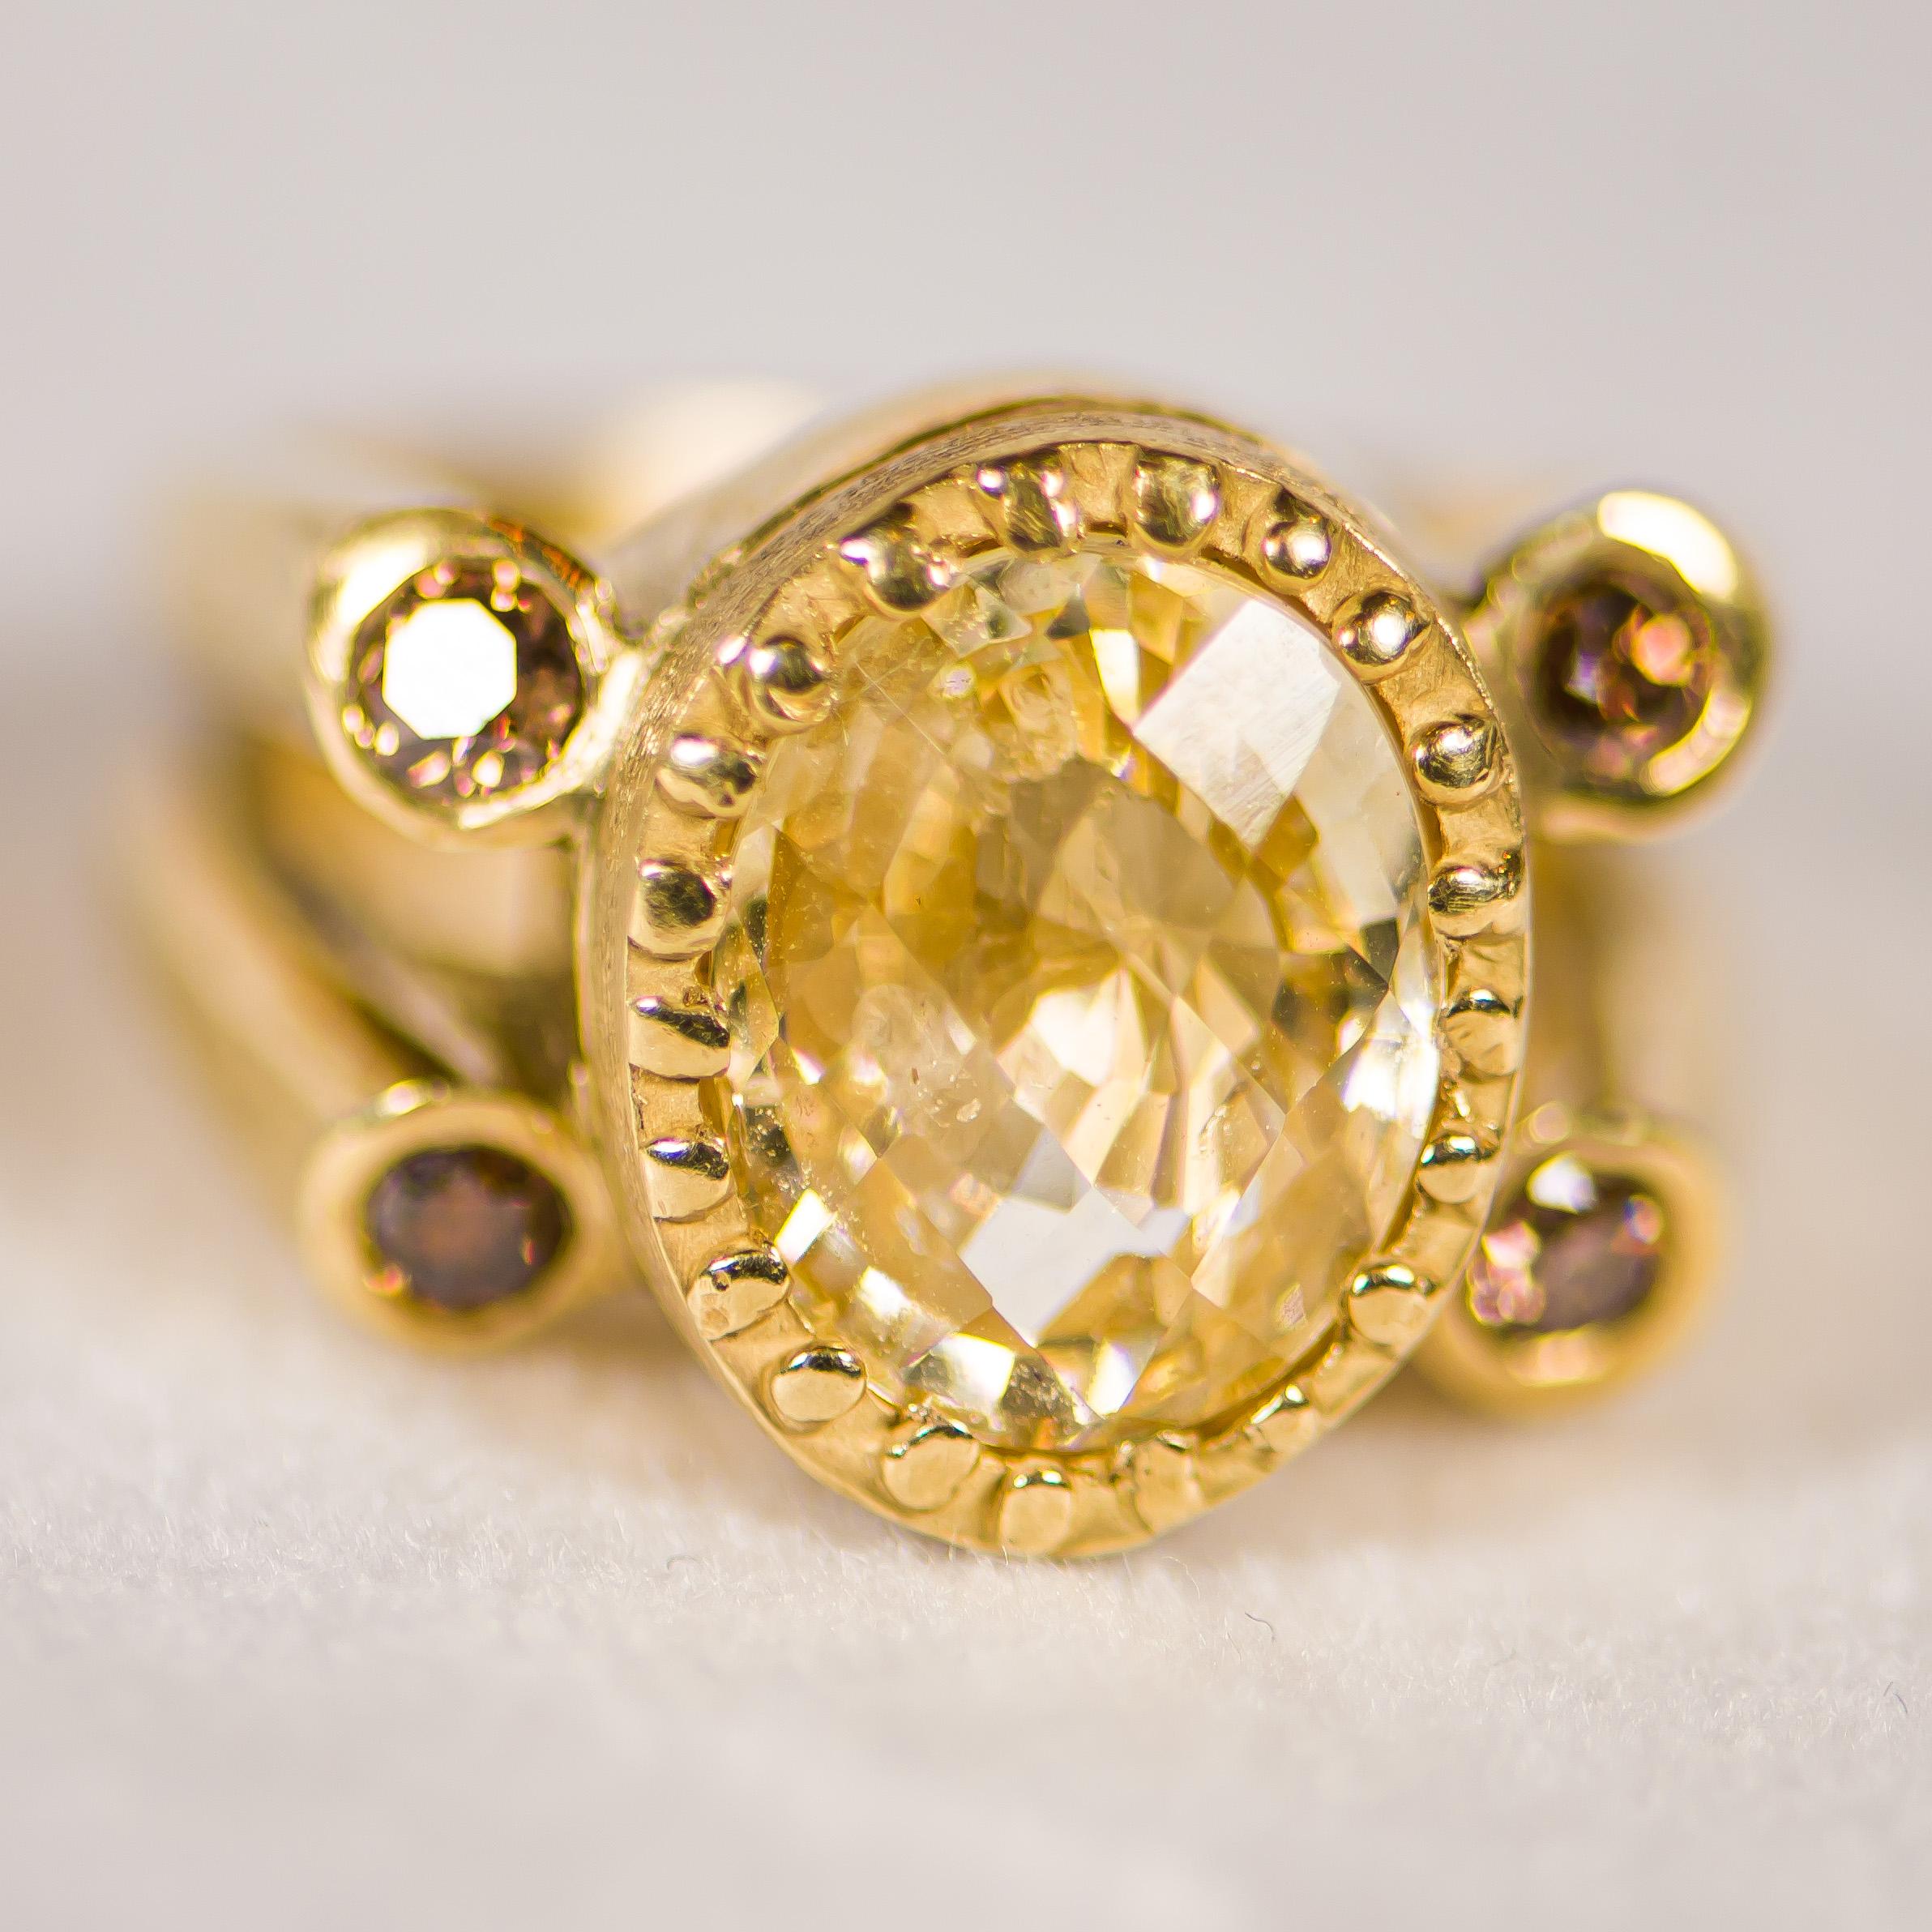 Another 1 of a kind piece by Julia Boss, who's a Palm Beach designer. Her pieces are only available at select Neiman Marcus locations.  We present this unique 6 carat faceted oval yellow sapphire boasting her signature U shape burnished accent